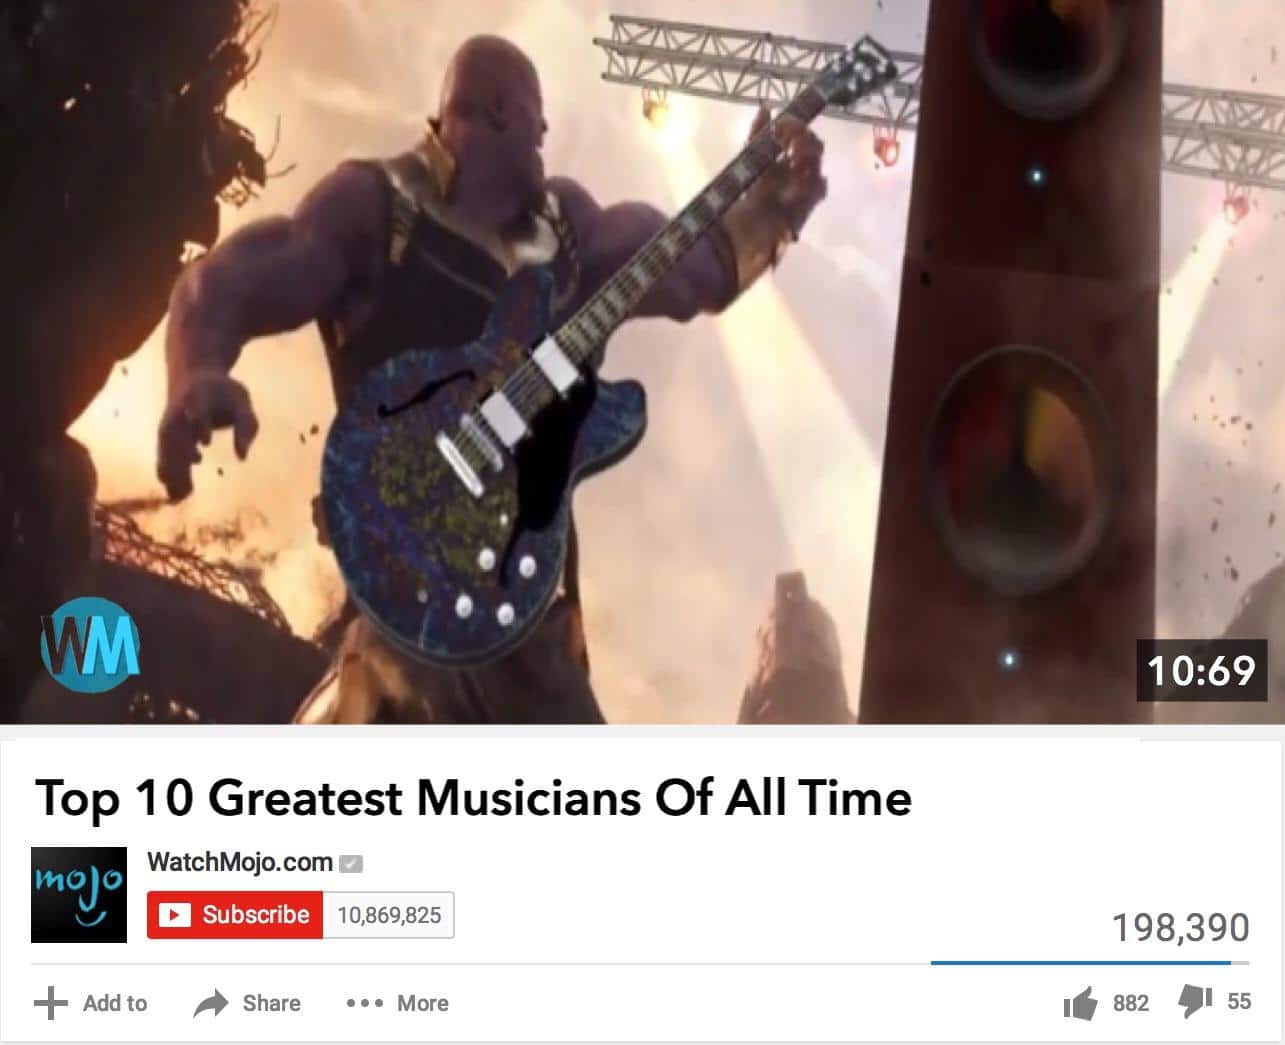 thanos avengers-memes thanos text: 10:69 Top 1 0 Greatest Musicians Of All Time WatchMojo.com 1+10Jo Subscribe 1 98,390 + Add to Share More 882 